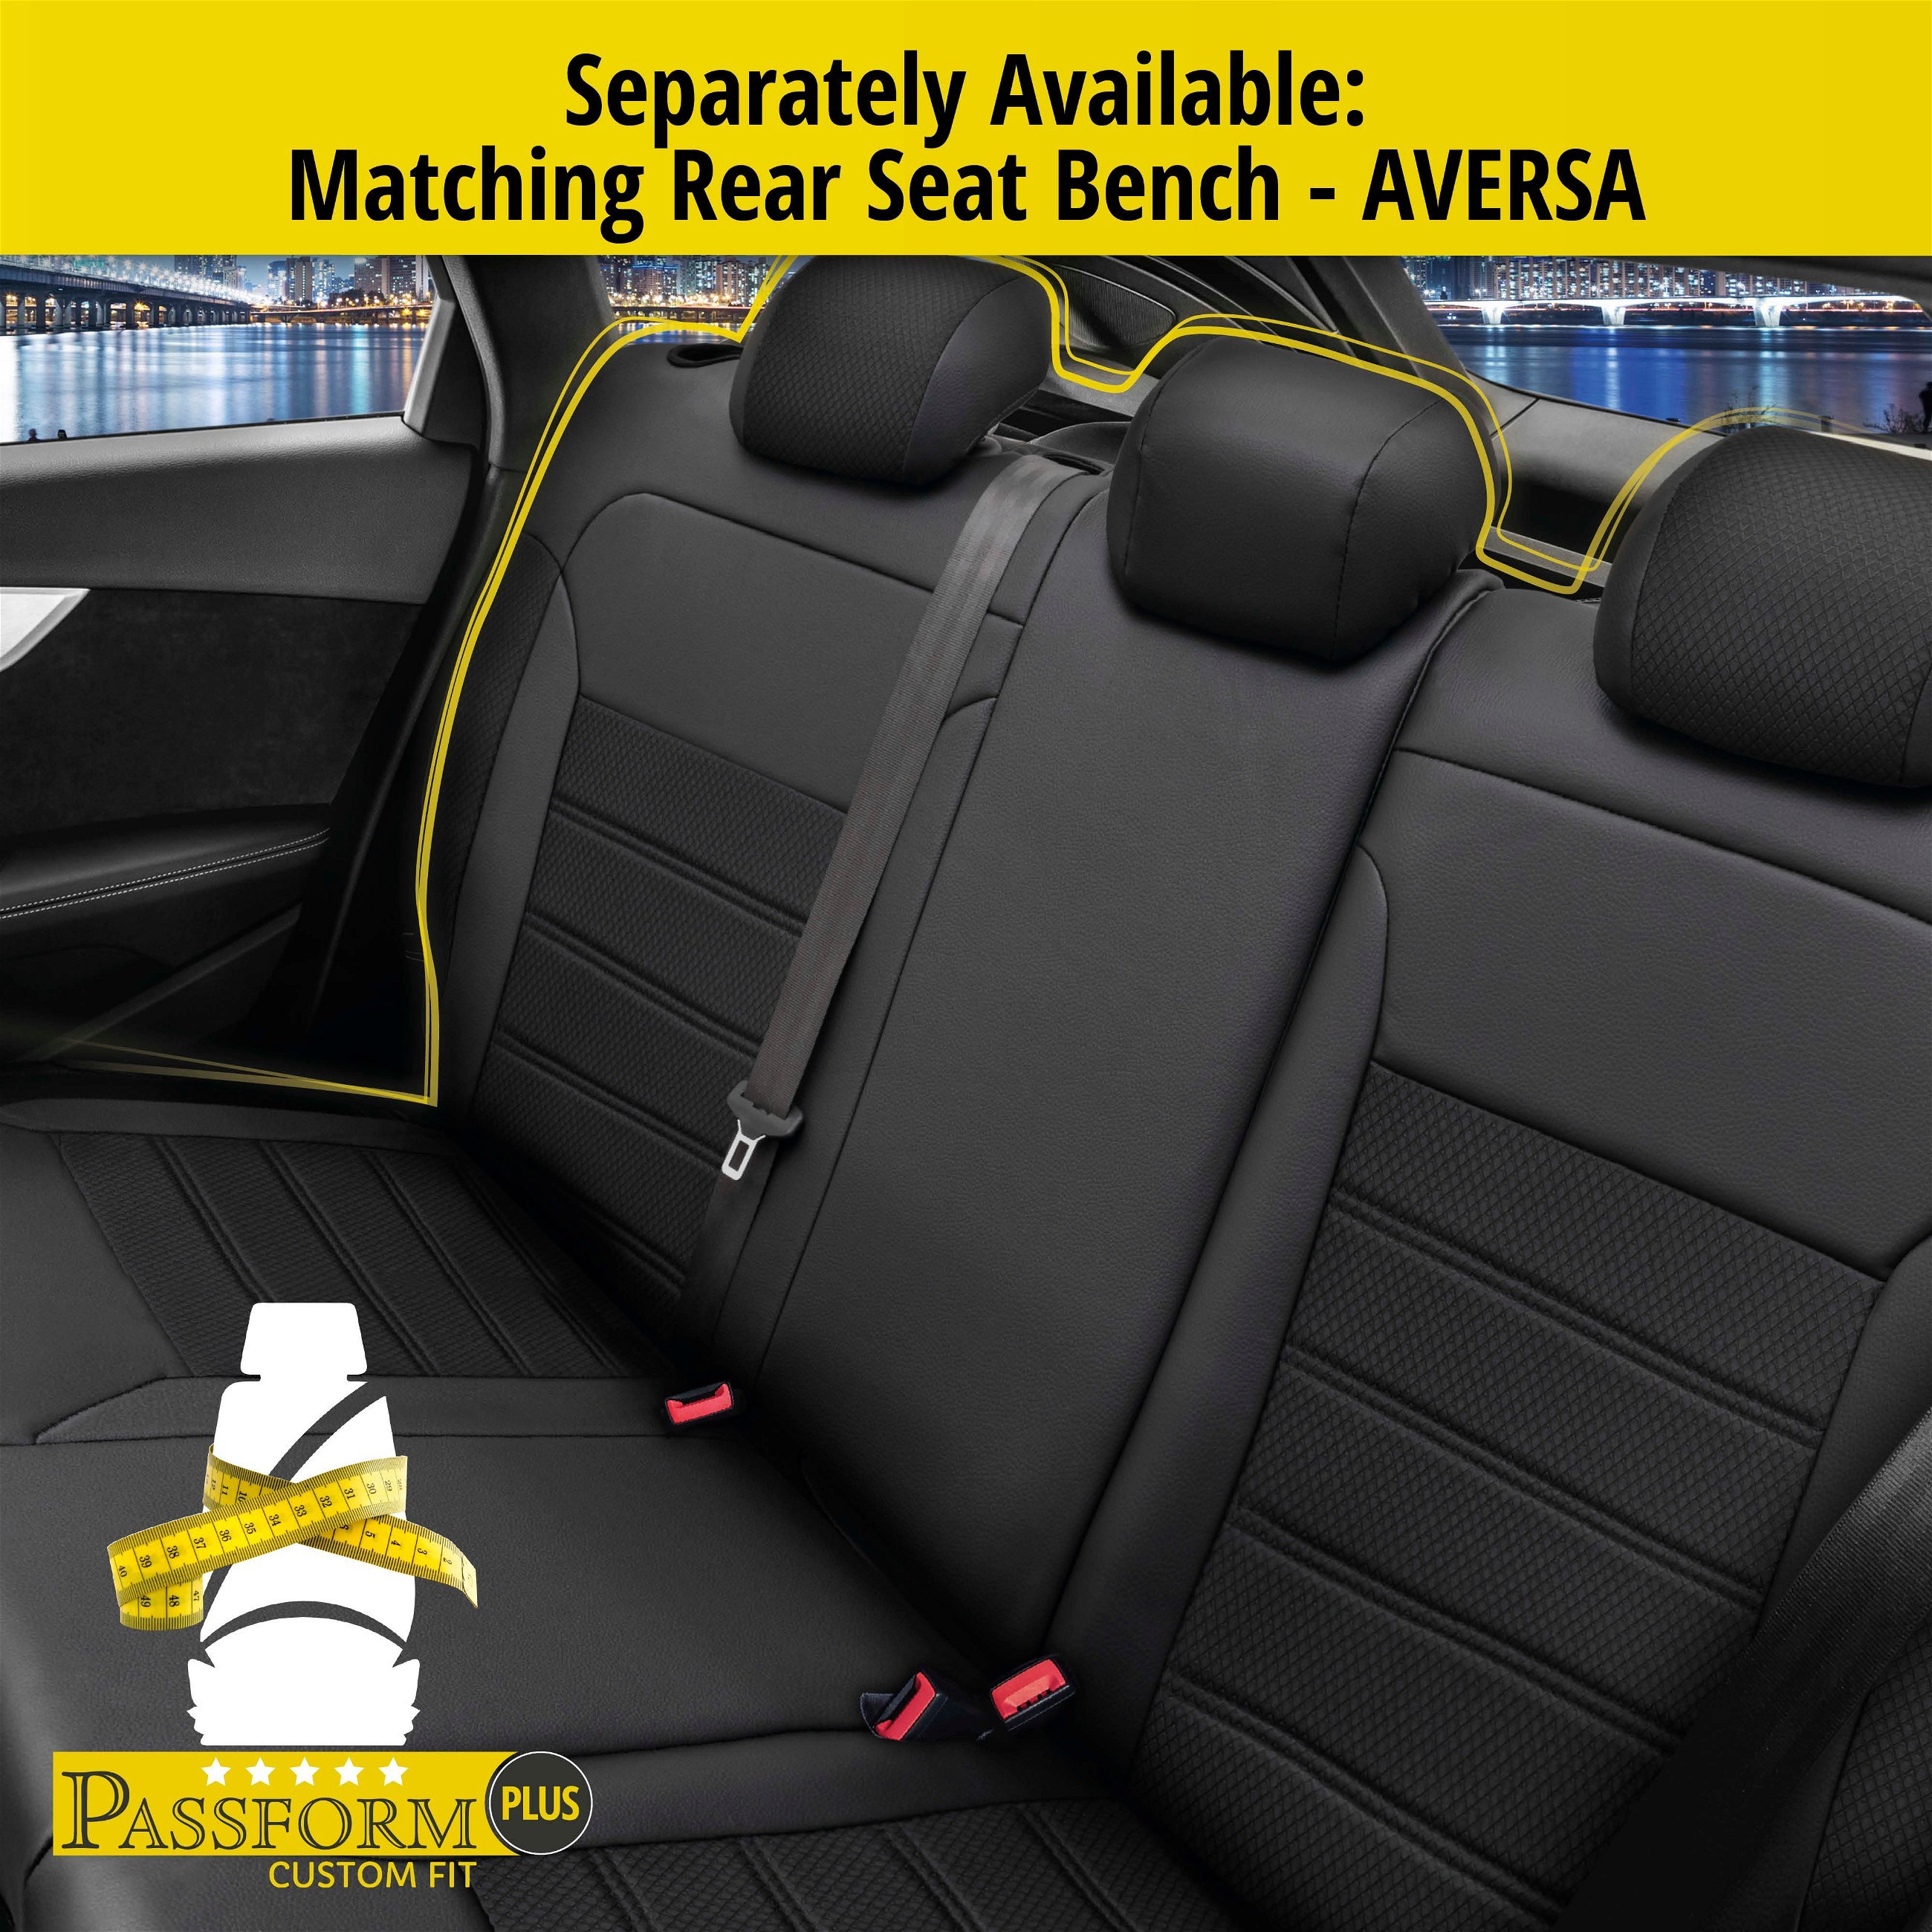 Seat Cover Aversa for Mitsubishi Colt VI (Z3A, Z2A) 10/2002-12/2012, 2 seat covers for normal seats